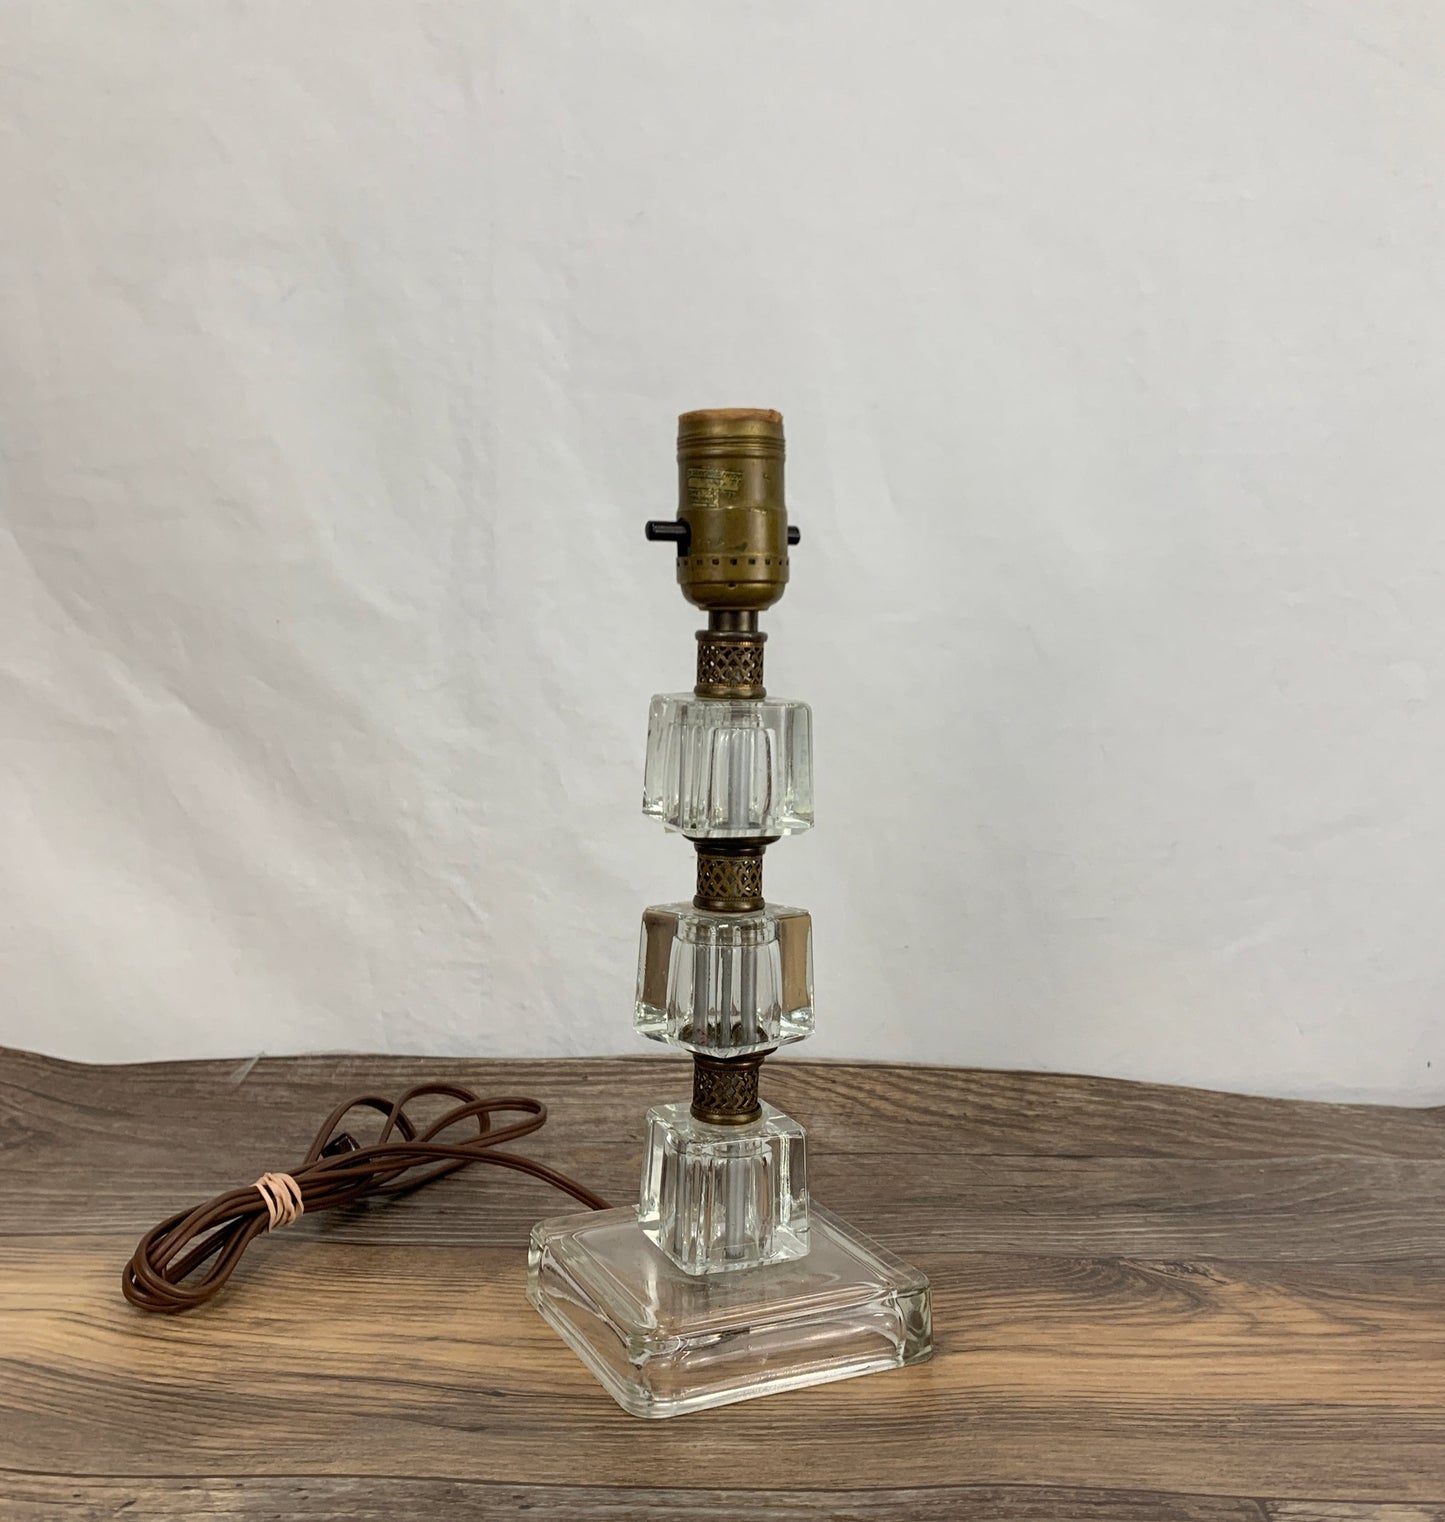 Vintage Glass Table Lamp with Brass Accents